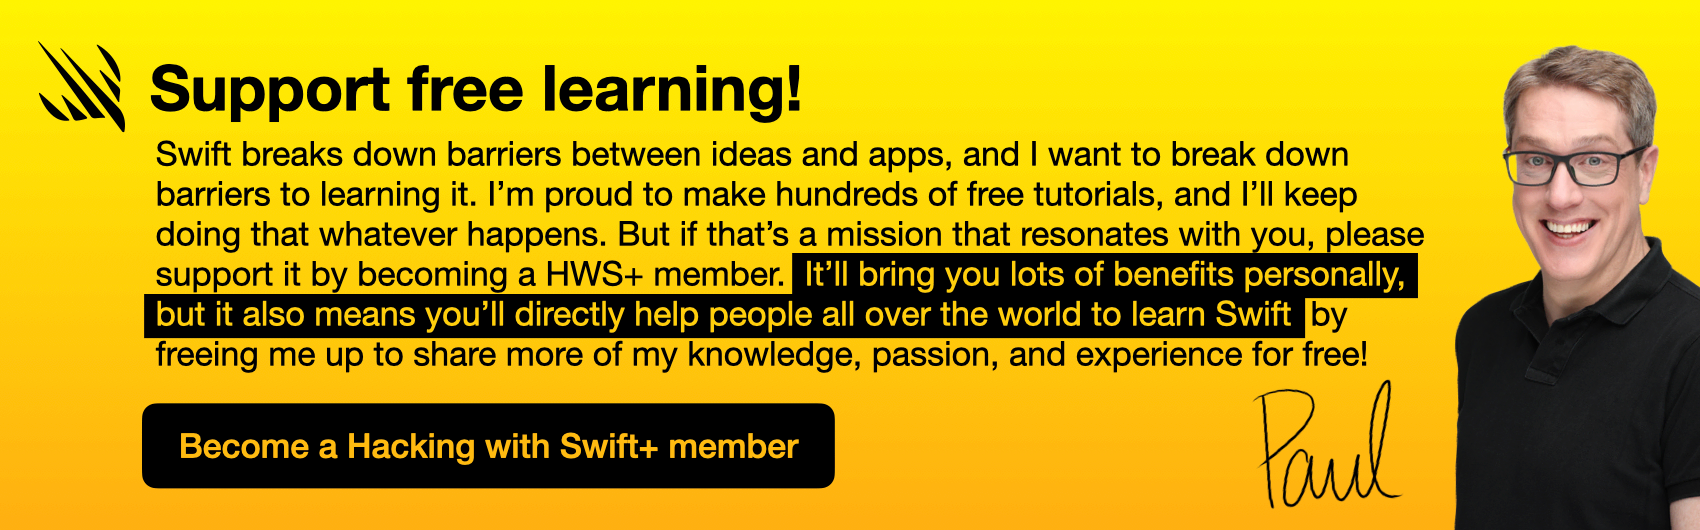 Swift breaks down barriers between ideas and apps, and I want to break down barriers to learning it. I’m proud to make hundreds of tutorials that are free to access, and I’ll keep doing that whatever happens. But if that’s a mission that resonates with you, please support it by becoming a HWS+ member. It’ll bring you lots of benefits personally, but it also means you’ll directly help people all over the world to learn Swift by freeing me up to share more of my knowledge, passion, and experience for free! Become Hacking with Swift+ member.